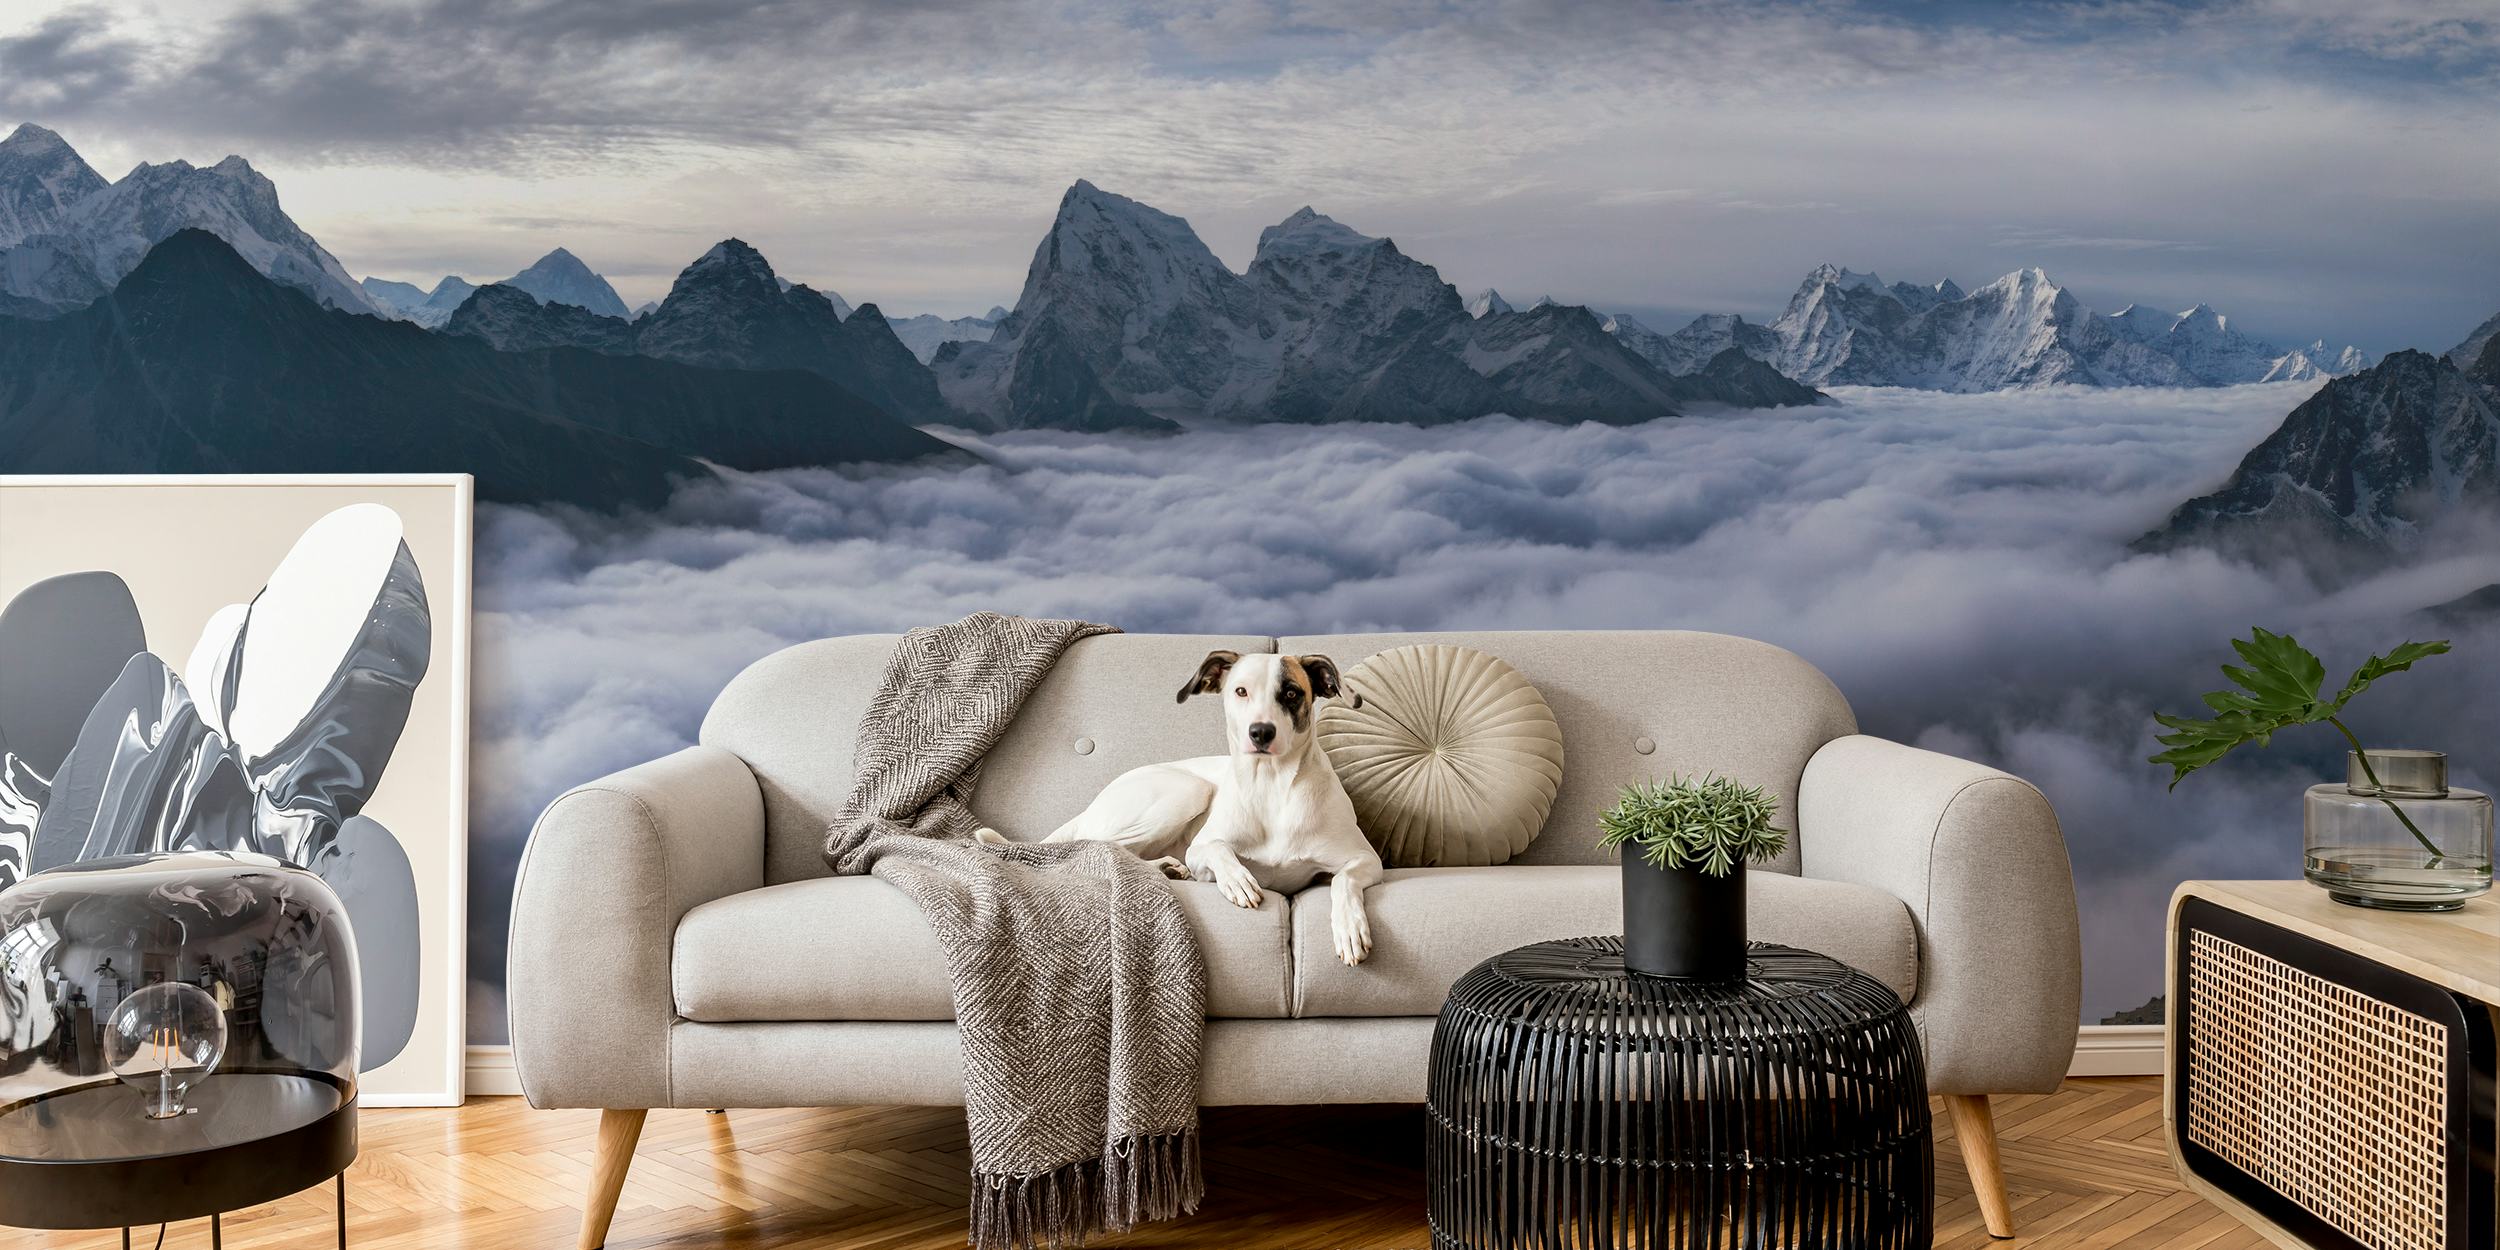 Misty clouds flowing through a mountain range in a wall mural